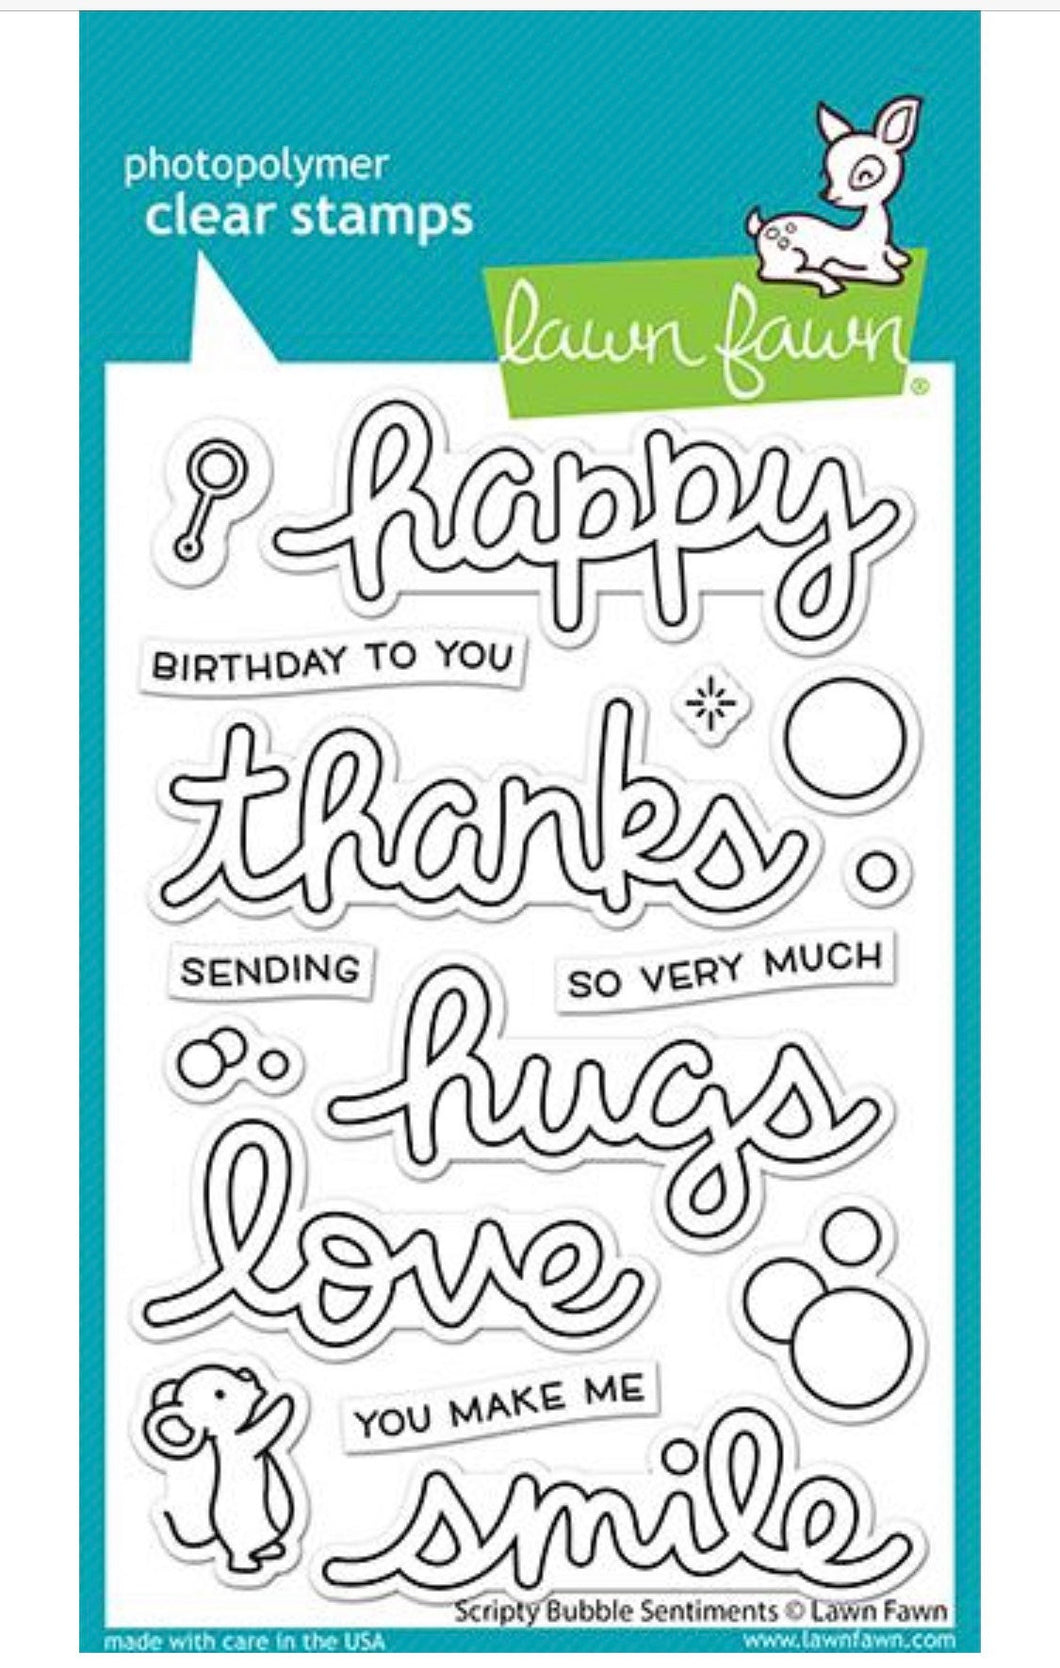 Lawn Fawn Clear Photopolymer Rubber Stamp set- Scripty Bubbles